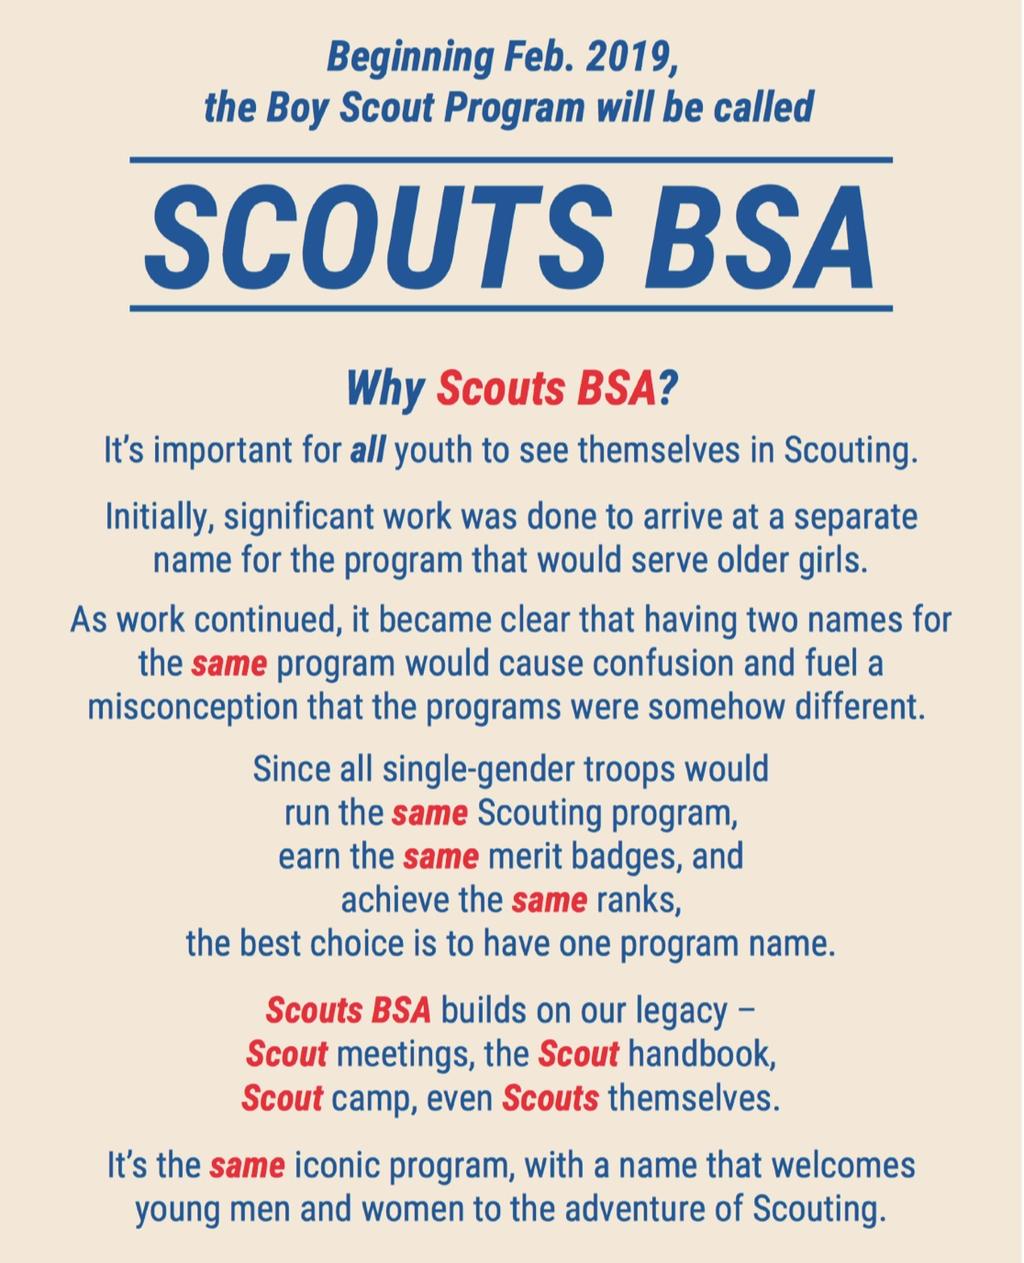 This explanation makes a lot of sense to me. And it shows that they will be earning the same merit badges, the same ranks etc.